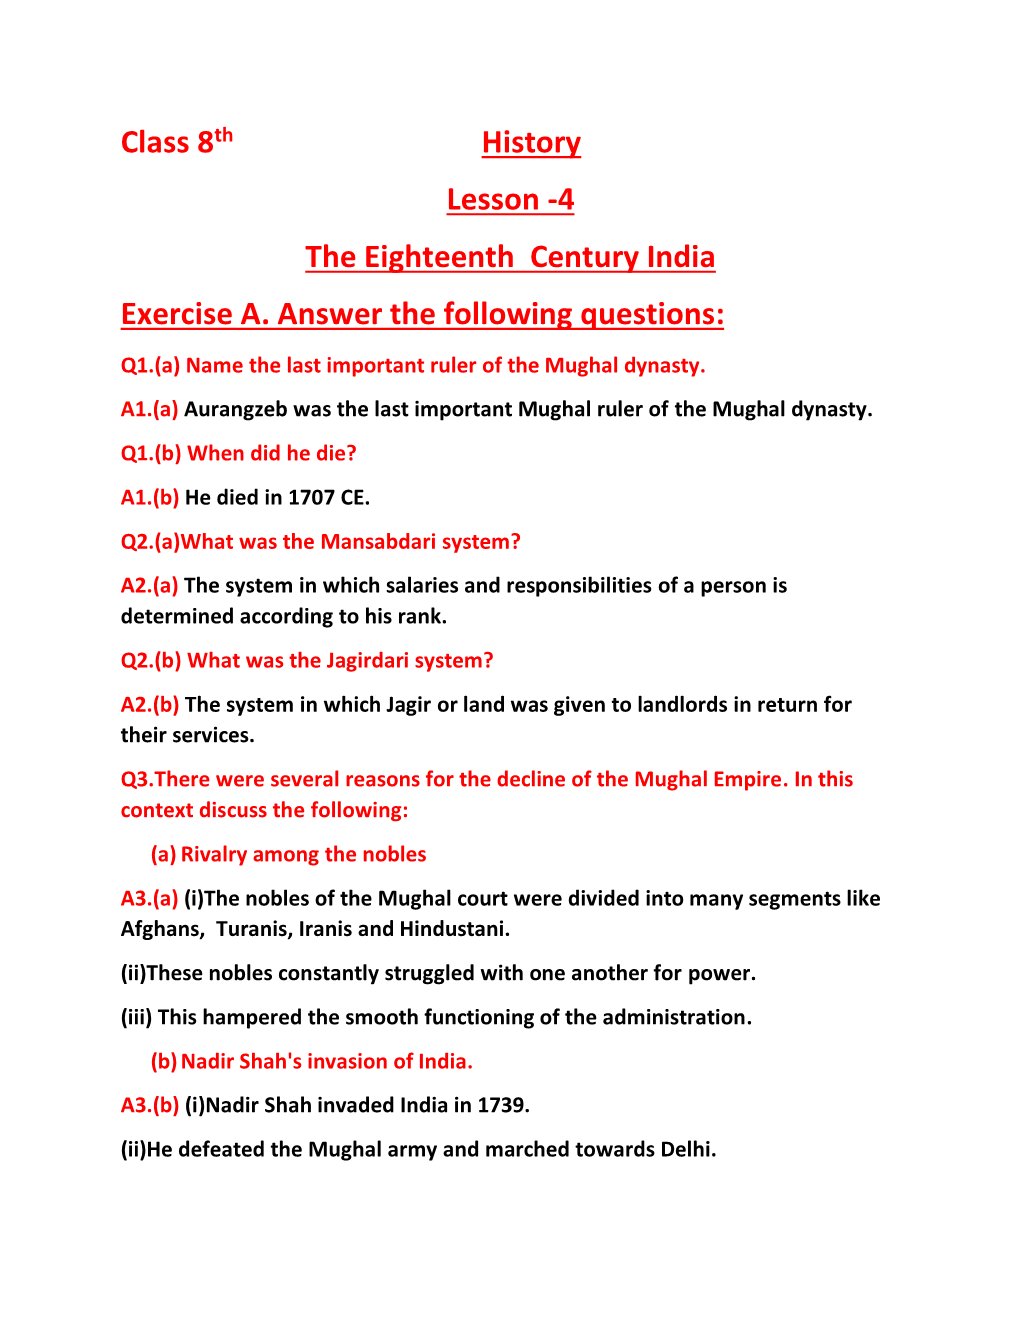 Class 8Th History Lesson -4 the Eighteenth Century India Exercise A. Answer the Following Questions: Q1.(A) Name the Last Important Ruler of the Mughal Dynasty